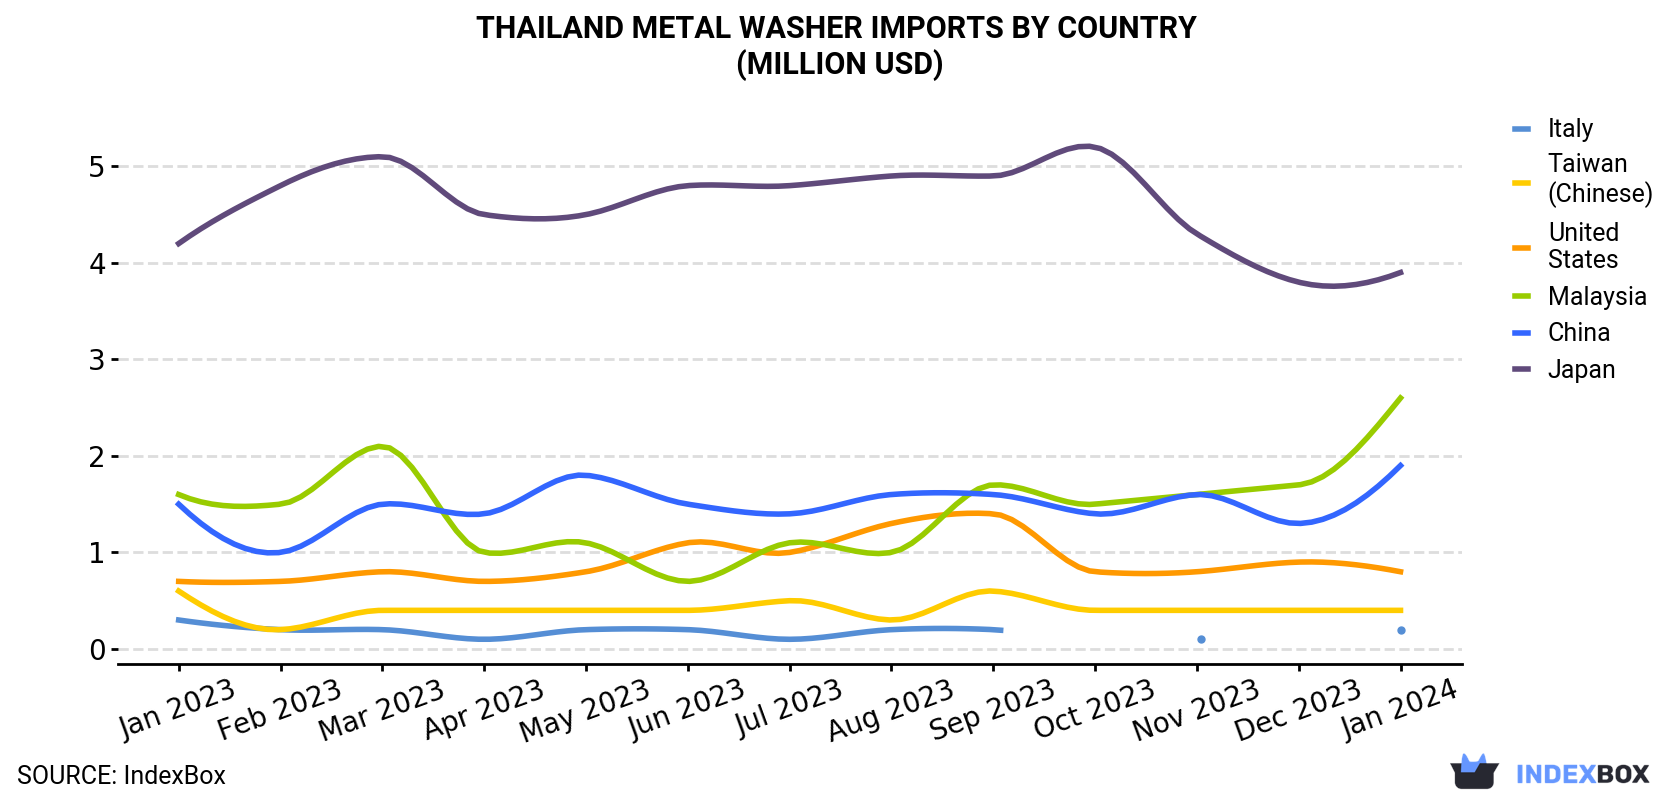 Thailand Metal Washer Imports By Country (Million USD)